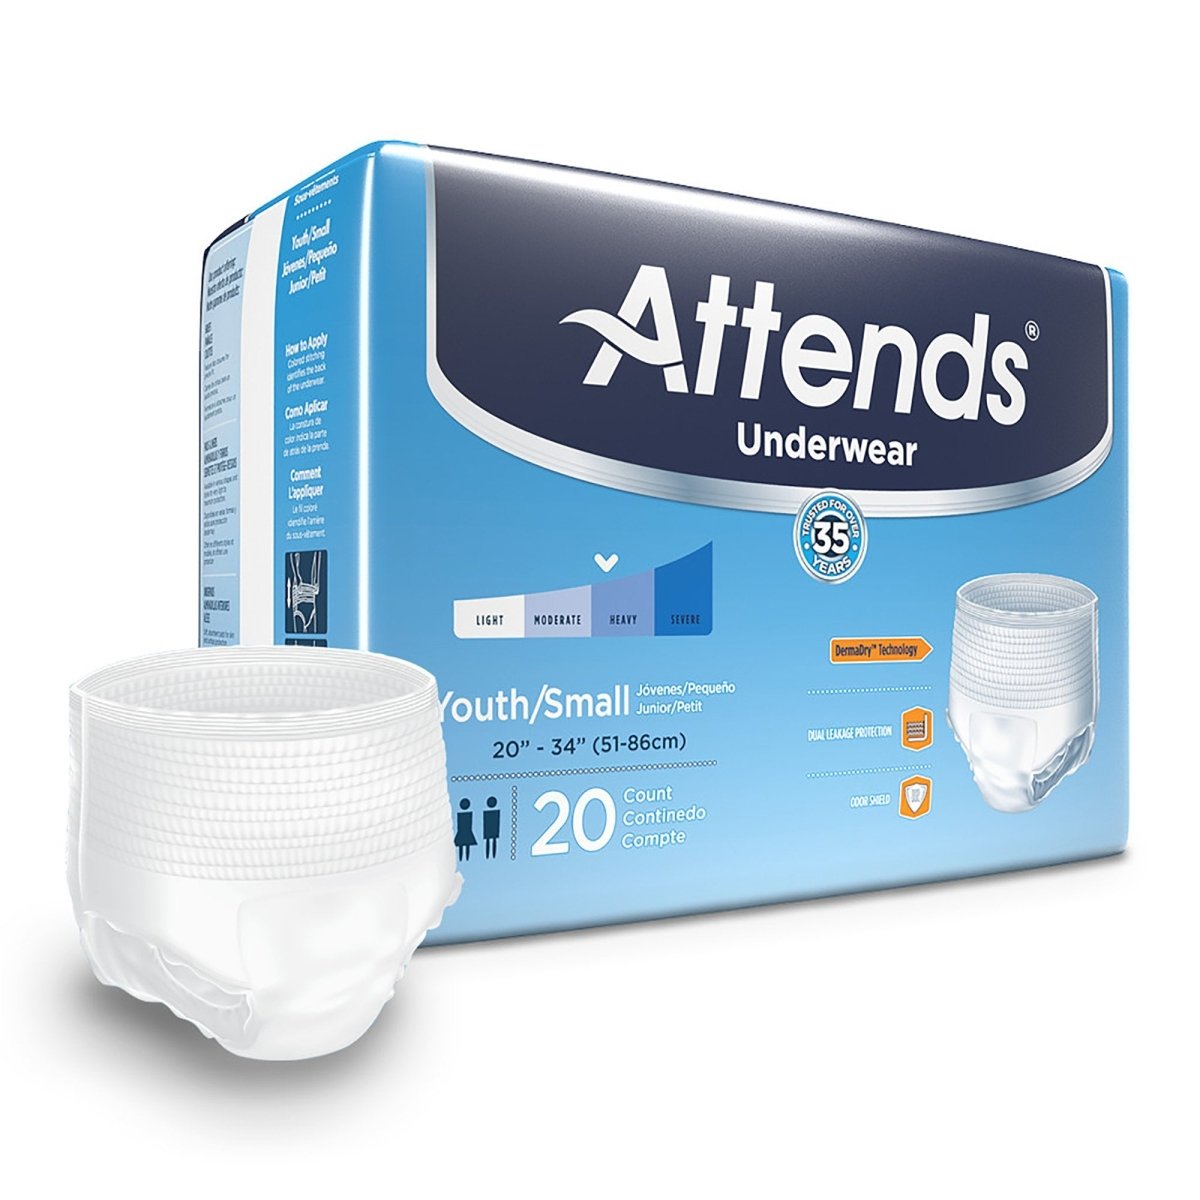 5 Common Mistakes You Must Avoid When Buying Adult Diapers - Cart Health